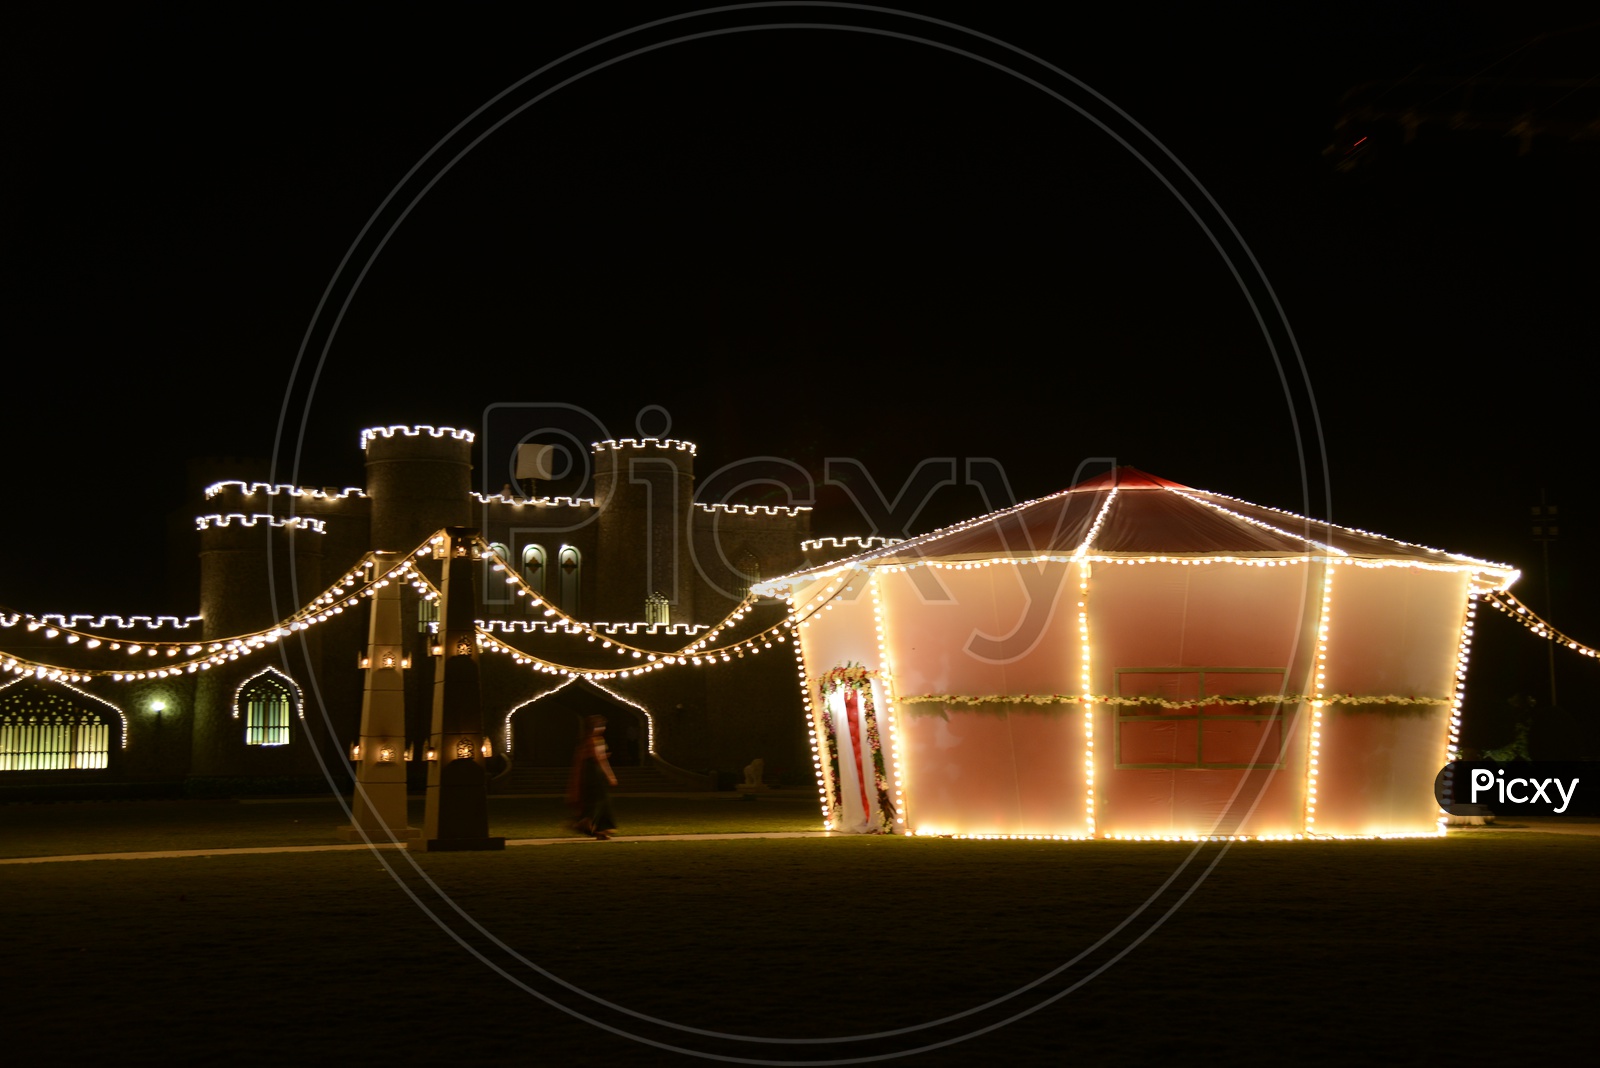 A Tent With Led Light Decoration  in Night Backdrop